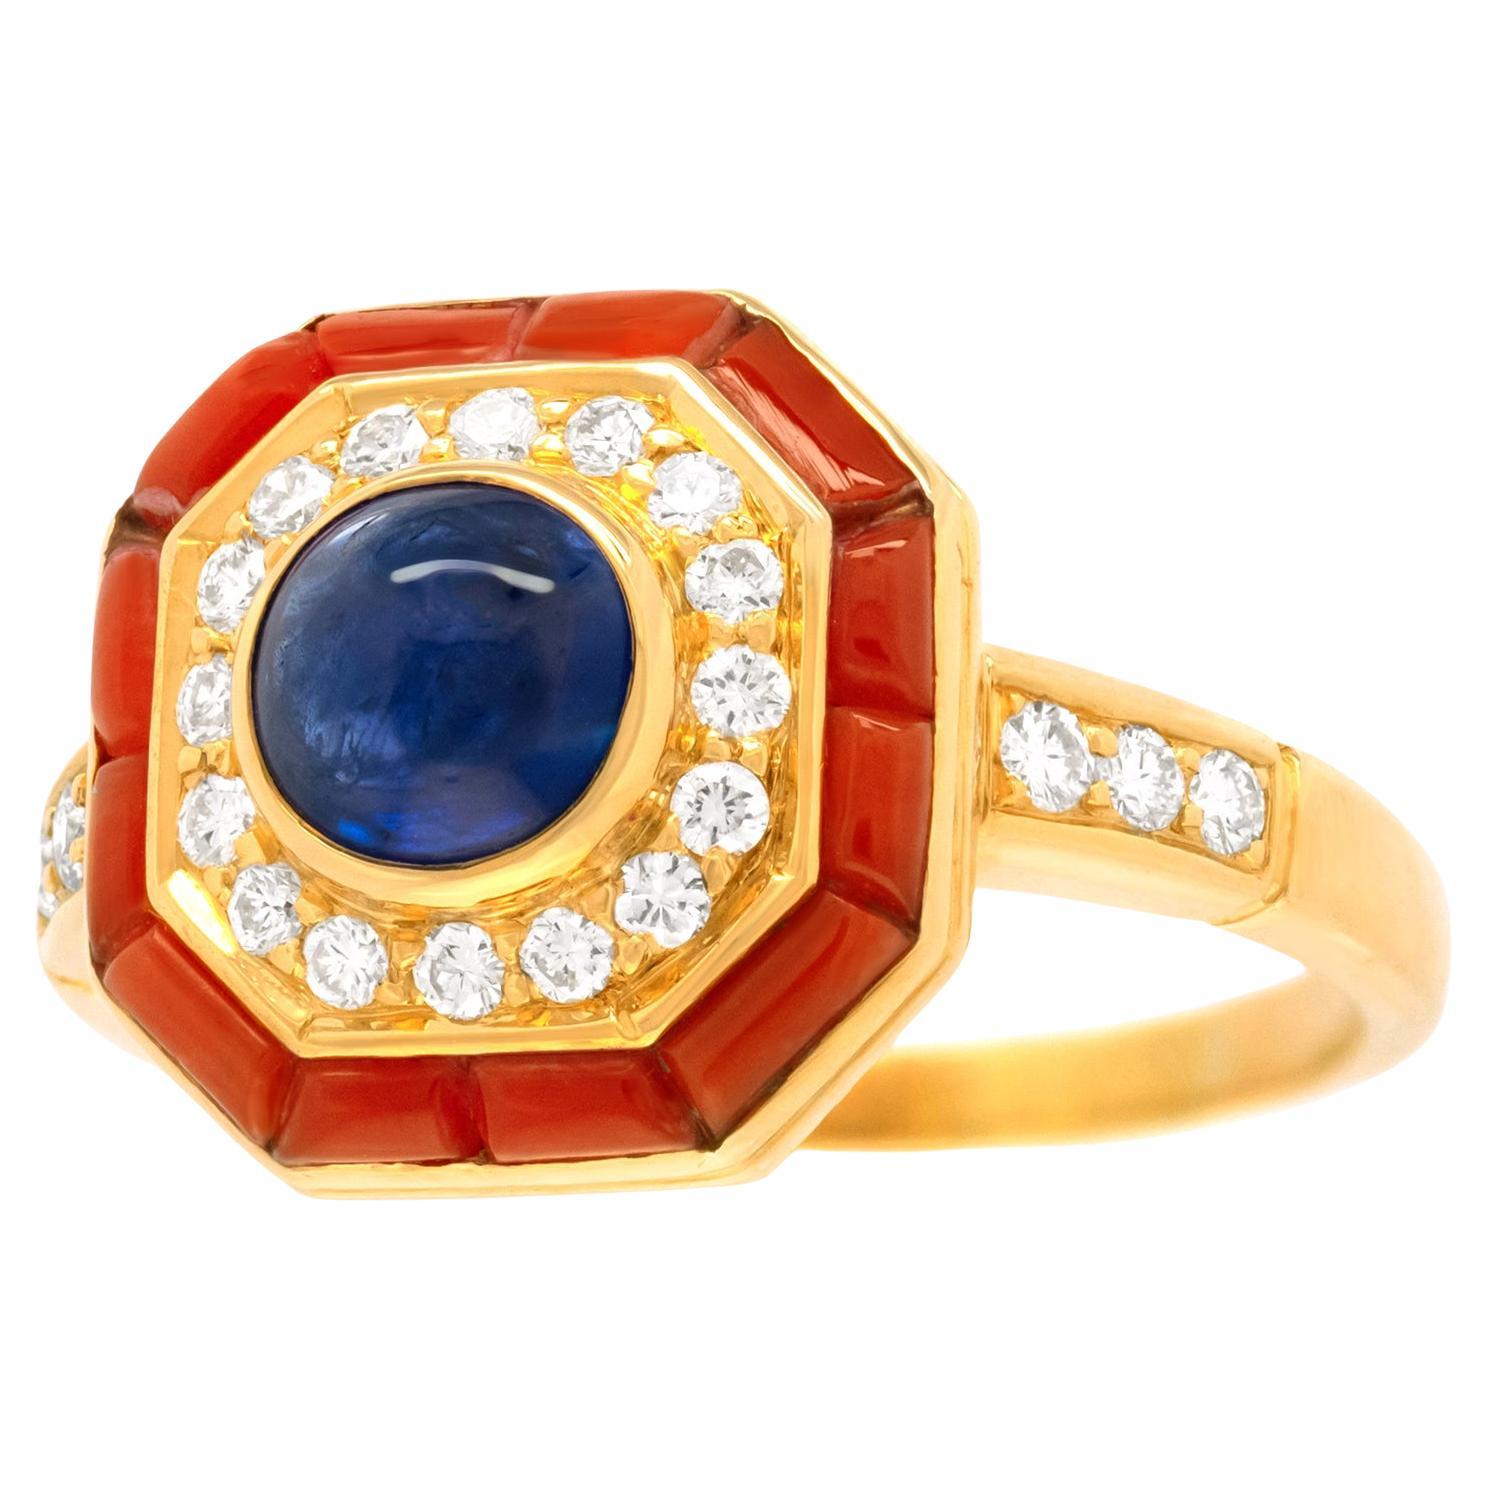 Spectacular Seventies French Ring For Sale